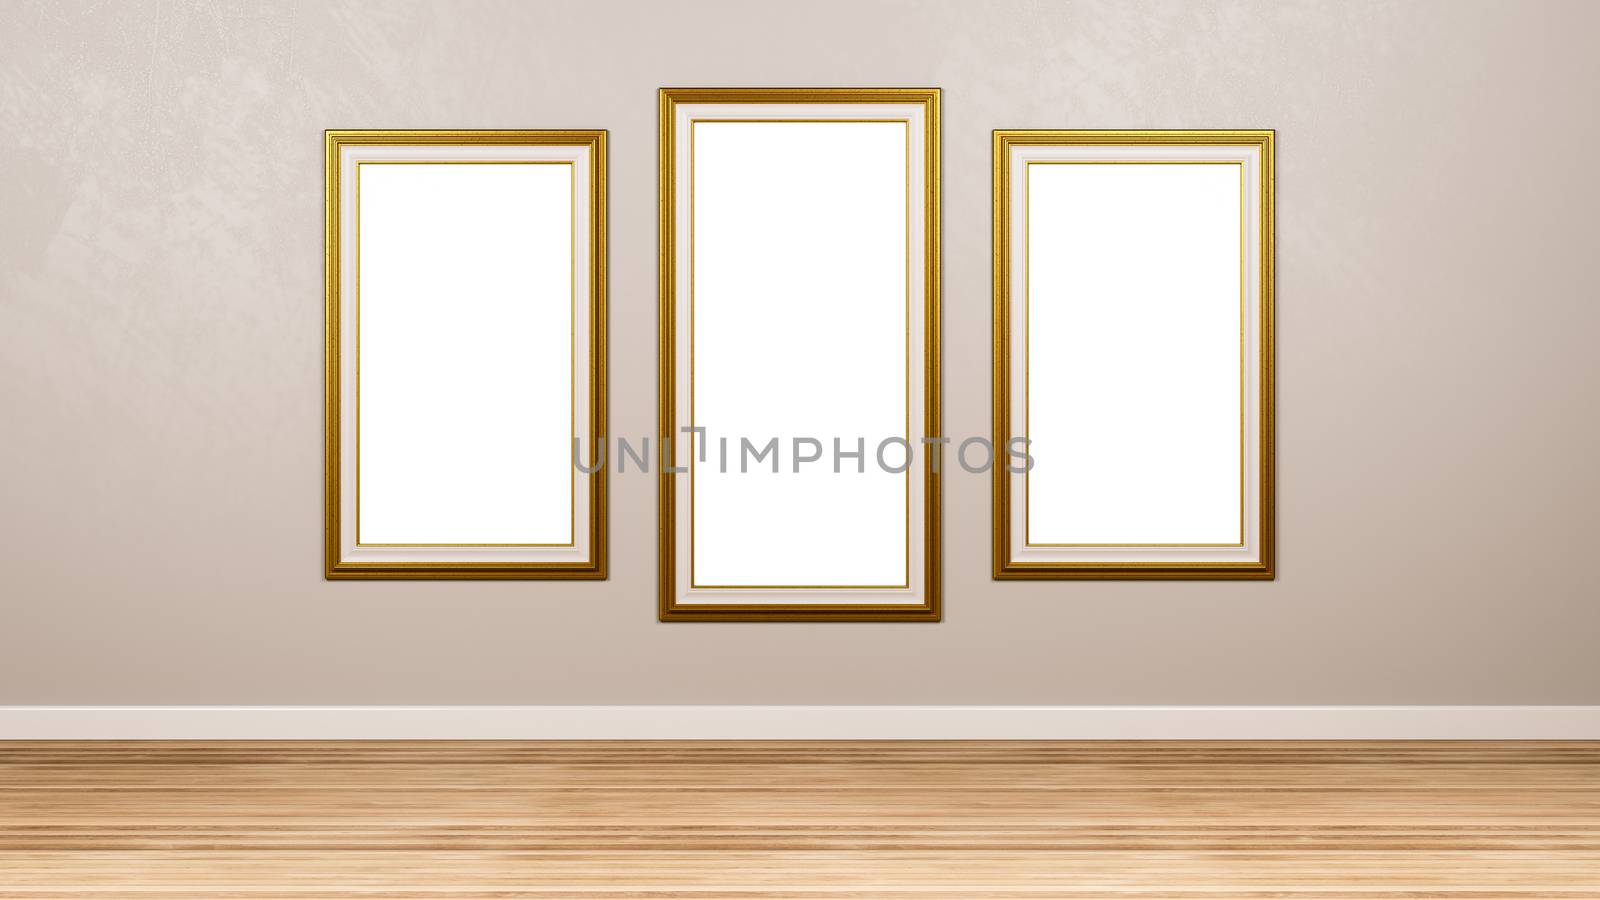 Triptych of Golden Empty Picture Frame at the Wall by make